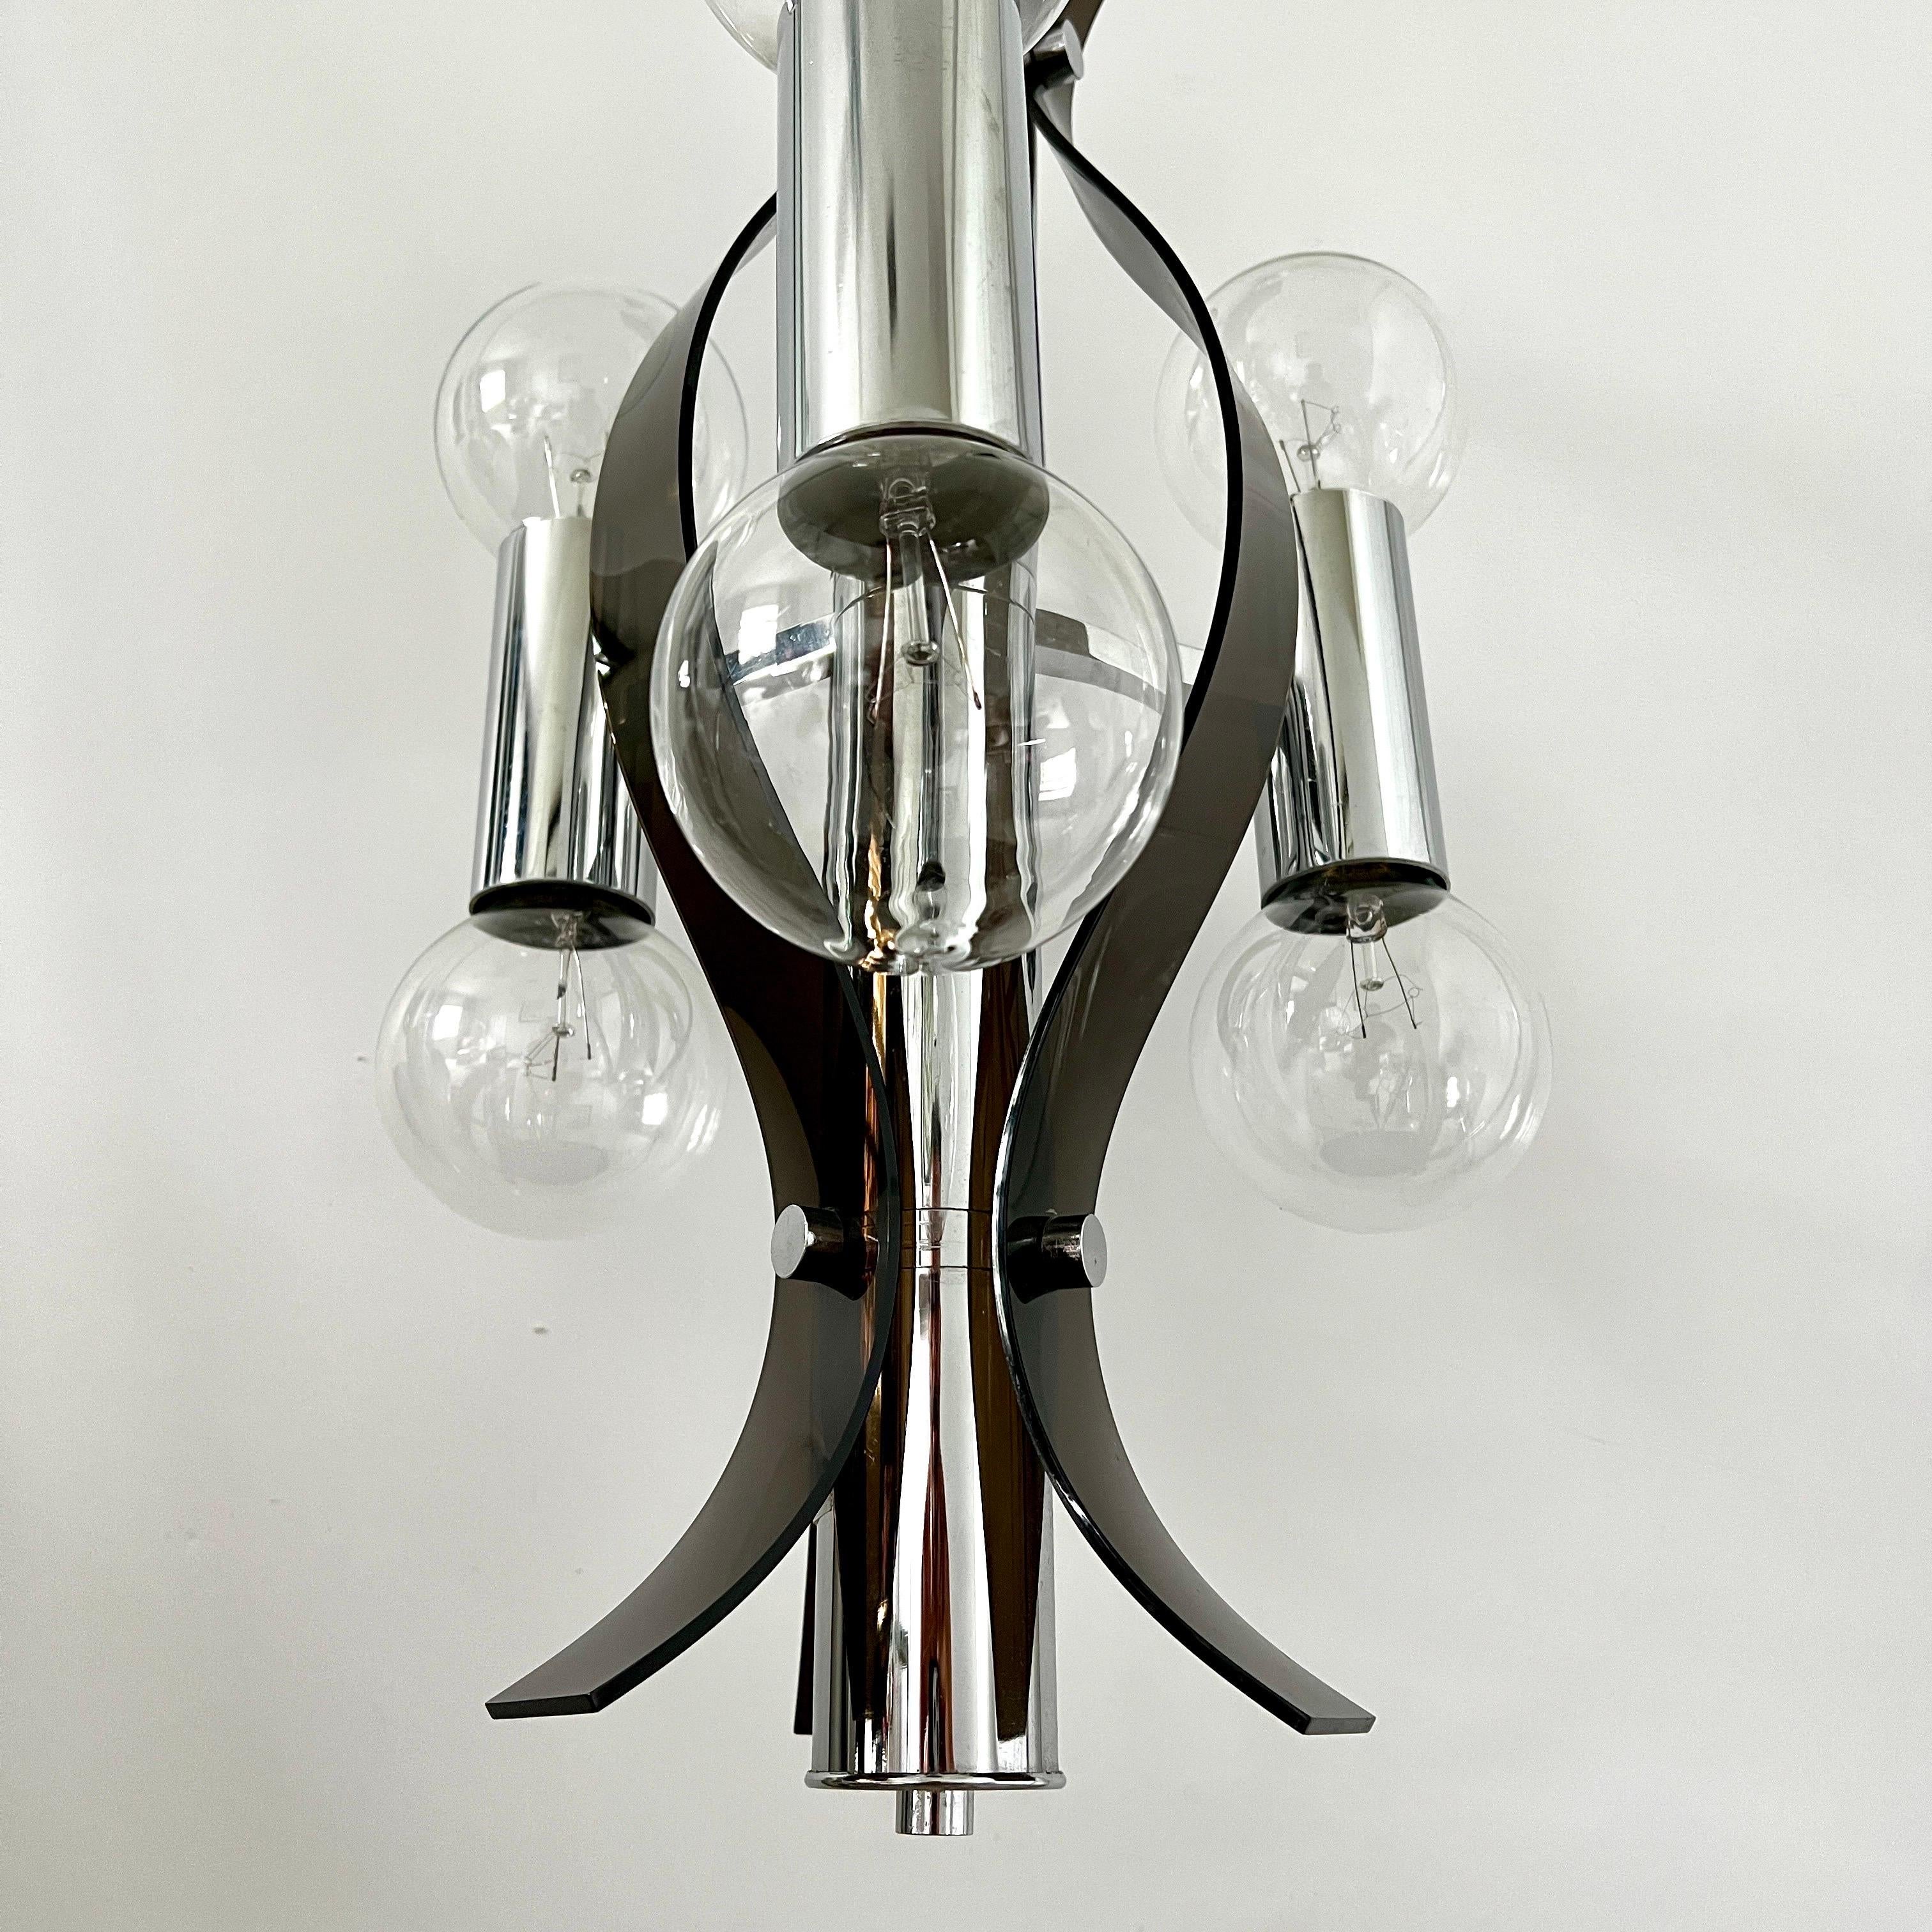 Sculptural Chandelier in Chrome and Smoked Lucite, Robert Sonneman, c. 1970's For Sale 2